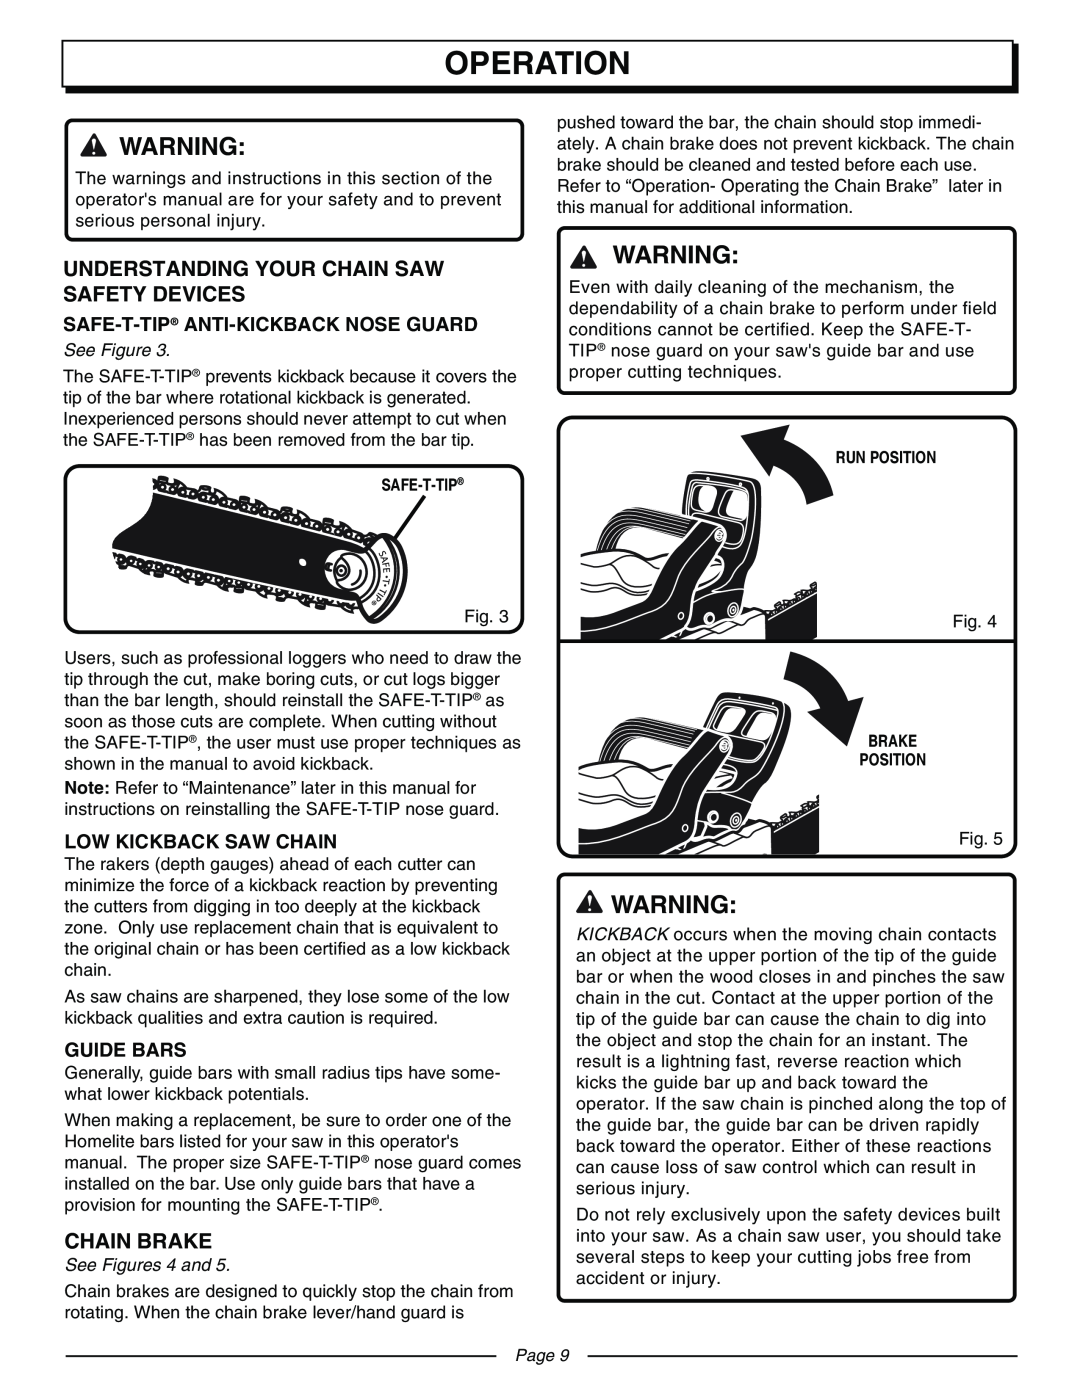 Homelite UT10570 Operation, Understanding Your Chain Saw Safety Devices, Chain Brake, Safe-T-Tip Anti-Kickbacknose Guard 